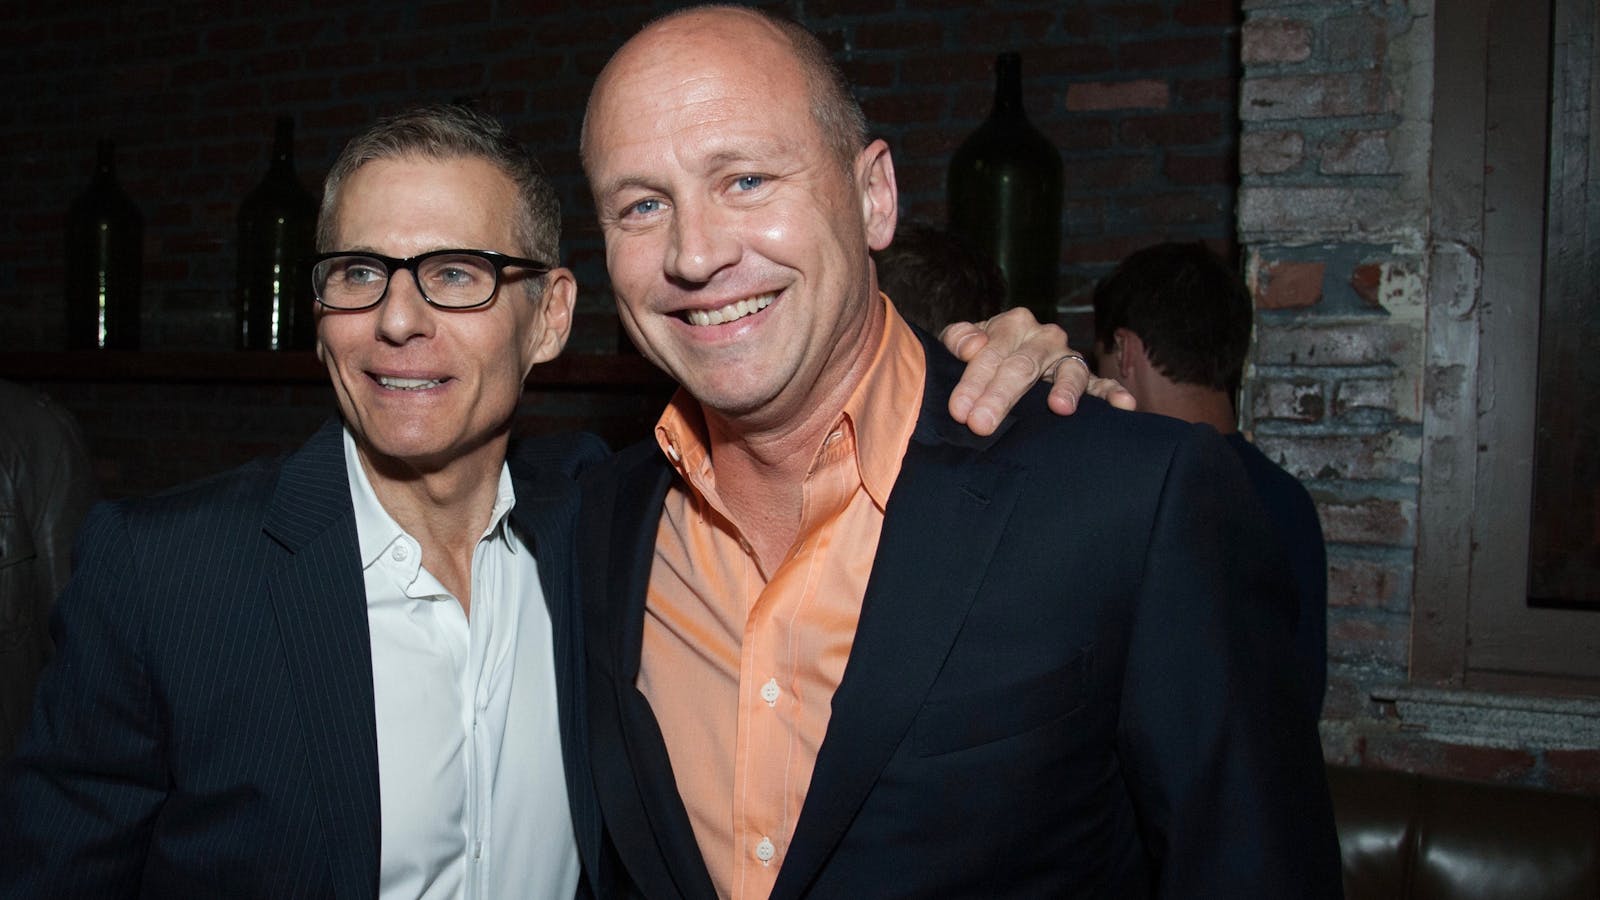 HBO's former programming chief Michael Lombardo with Silicon Valley producer Mike Judge. Photo by AP.